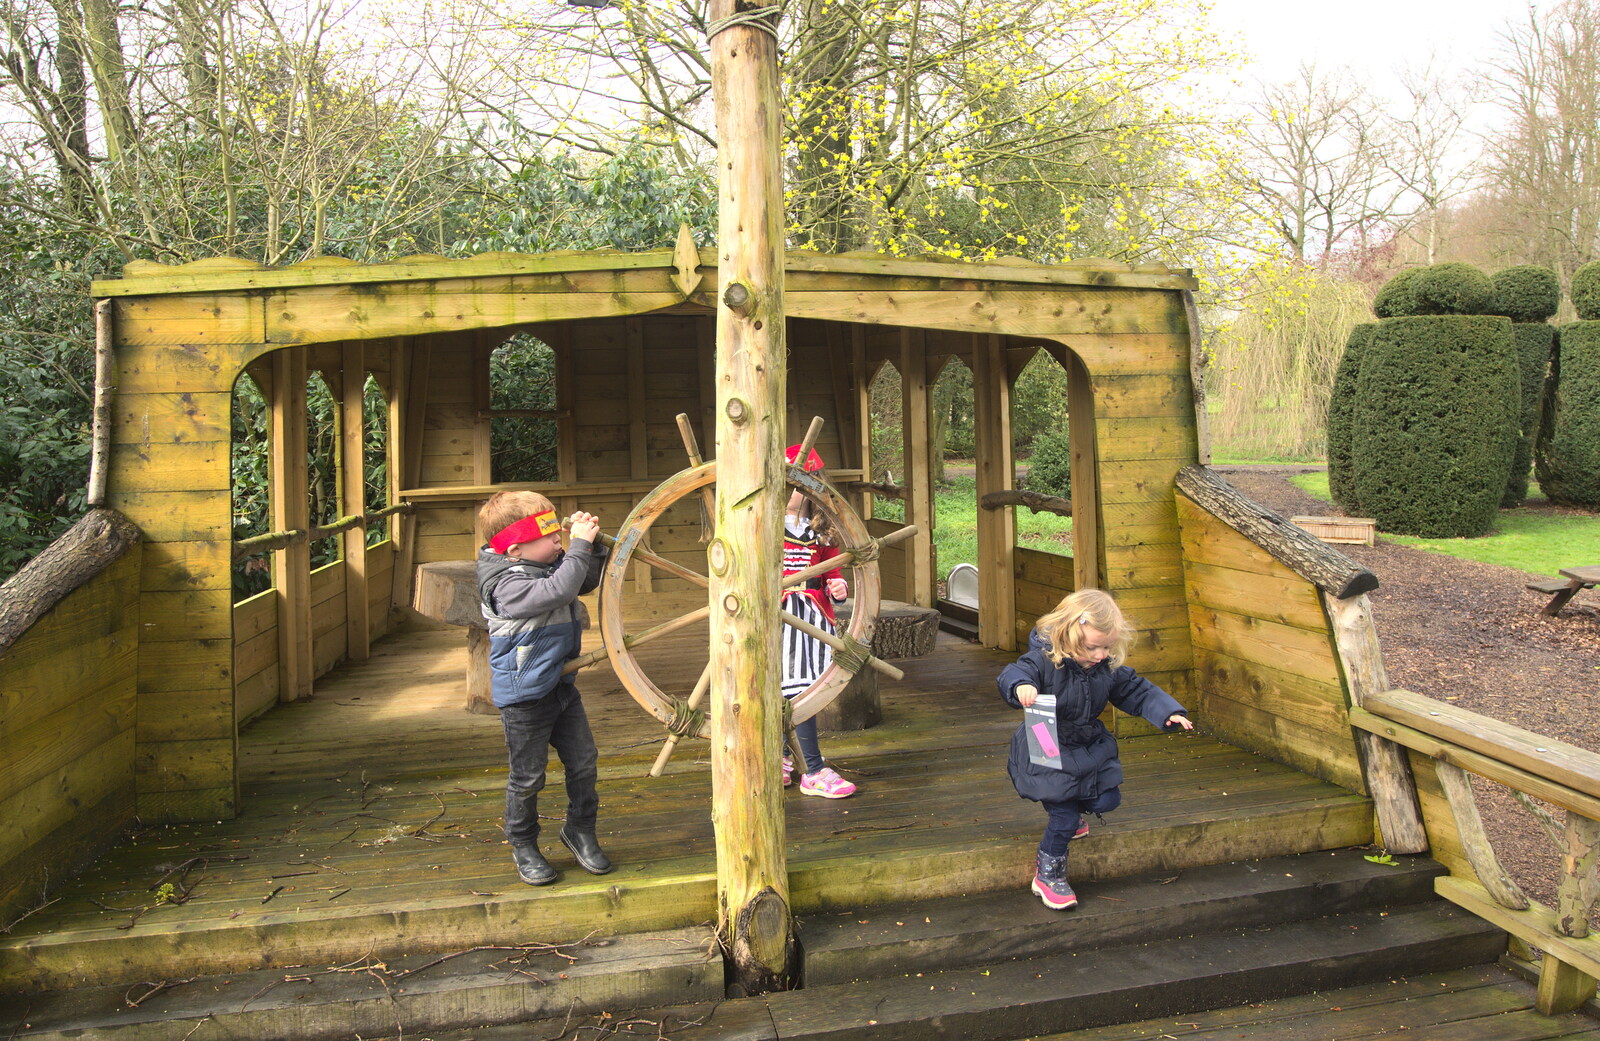 On board the pirate ship from Harry's Pirate Party, The Oaksmere, Brome, Suffolk - 16th April 2016